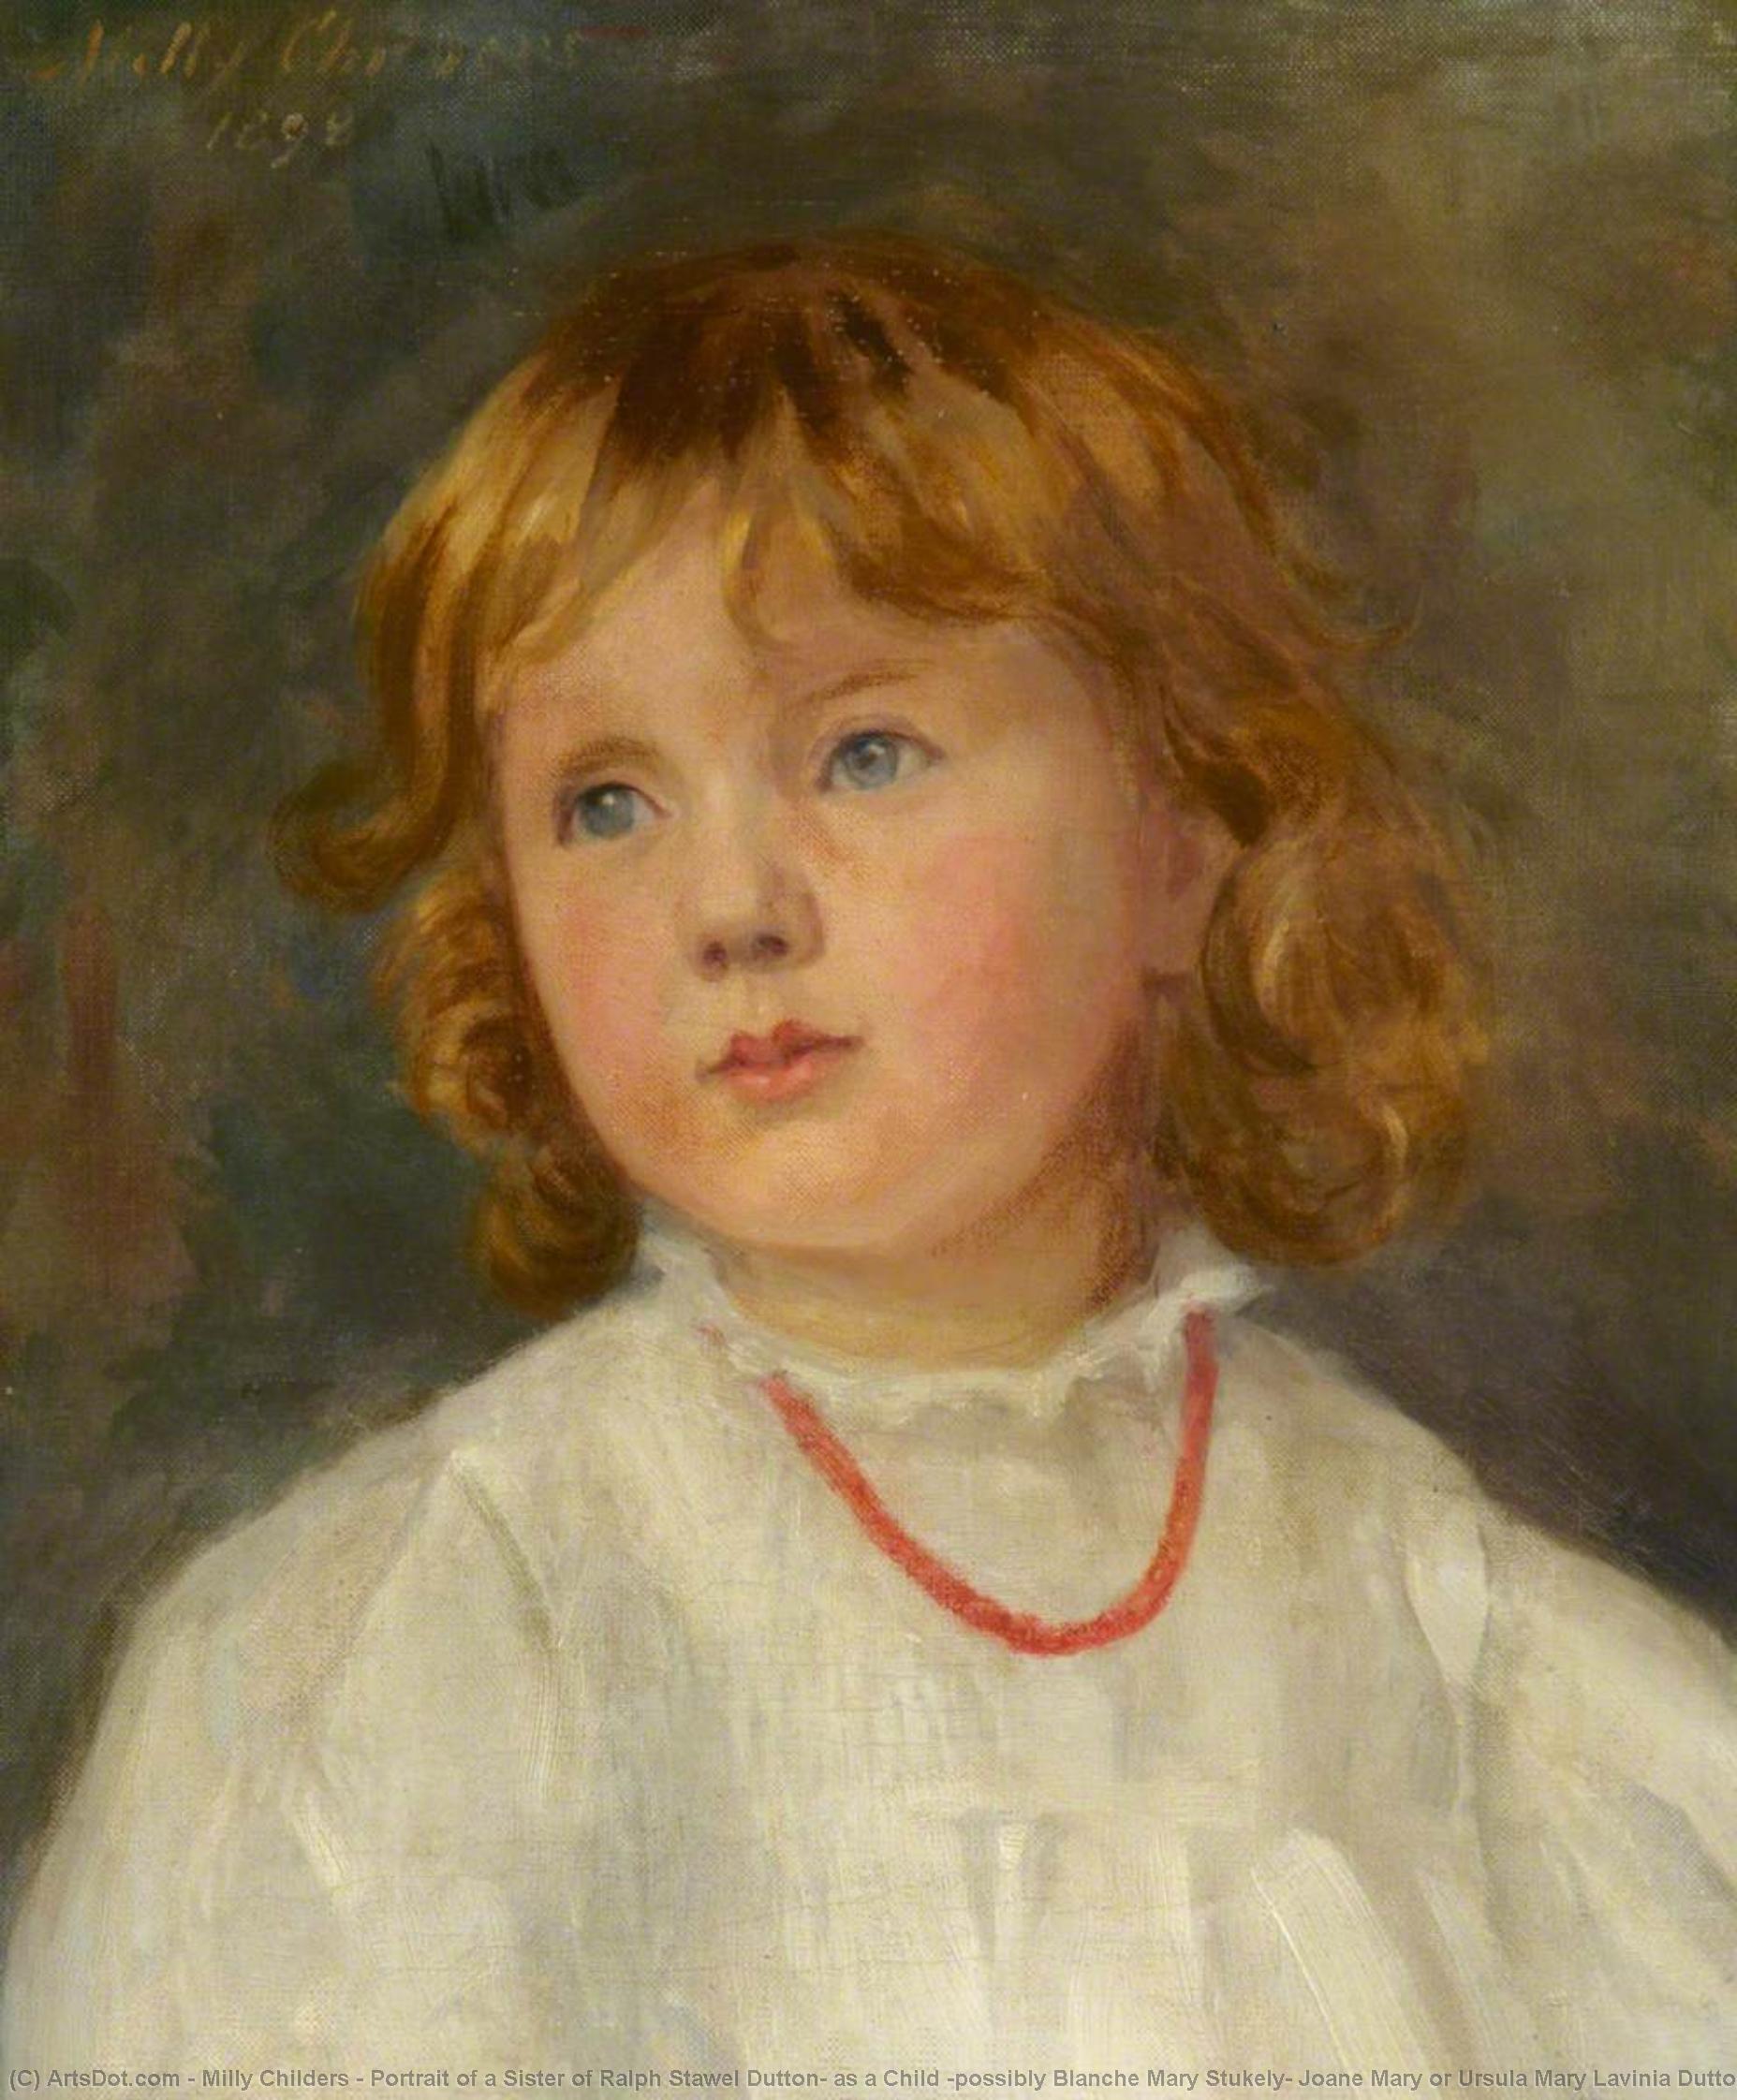 Buy Museum Art Reproductions Portrait of a Sister of Ralph Stawel Dutton, as a Child (possibly Blanche Mary Stukely, Joane Mary or Ursula Mary Lavinia Dutton, b.1896), 1898 by Milly Childers (1866-1922) | ArtsDot.com